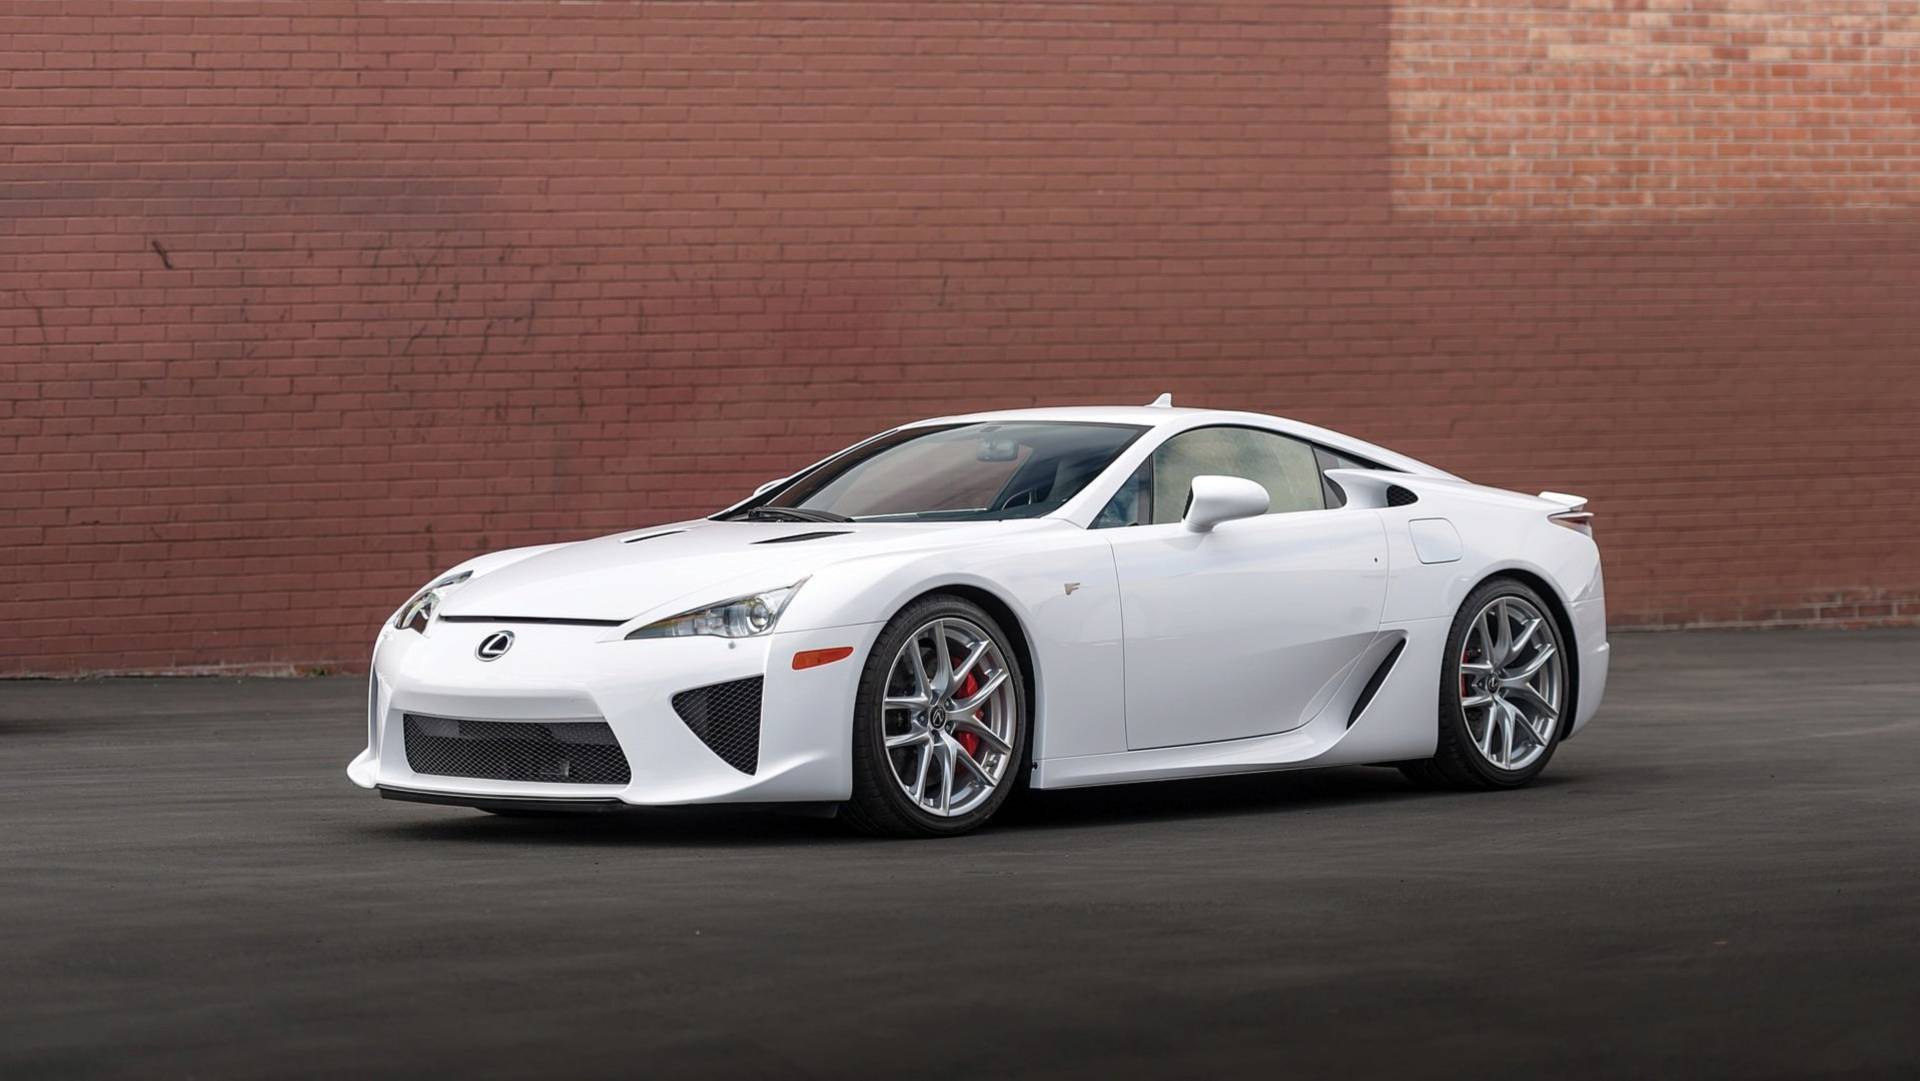 Lexus Lfa To Be Auctioned At Pebble Beach This Month Lexus